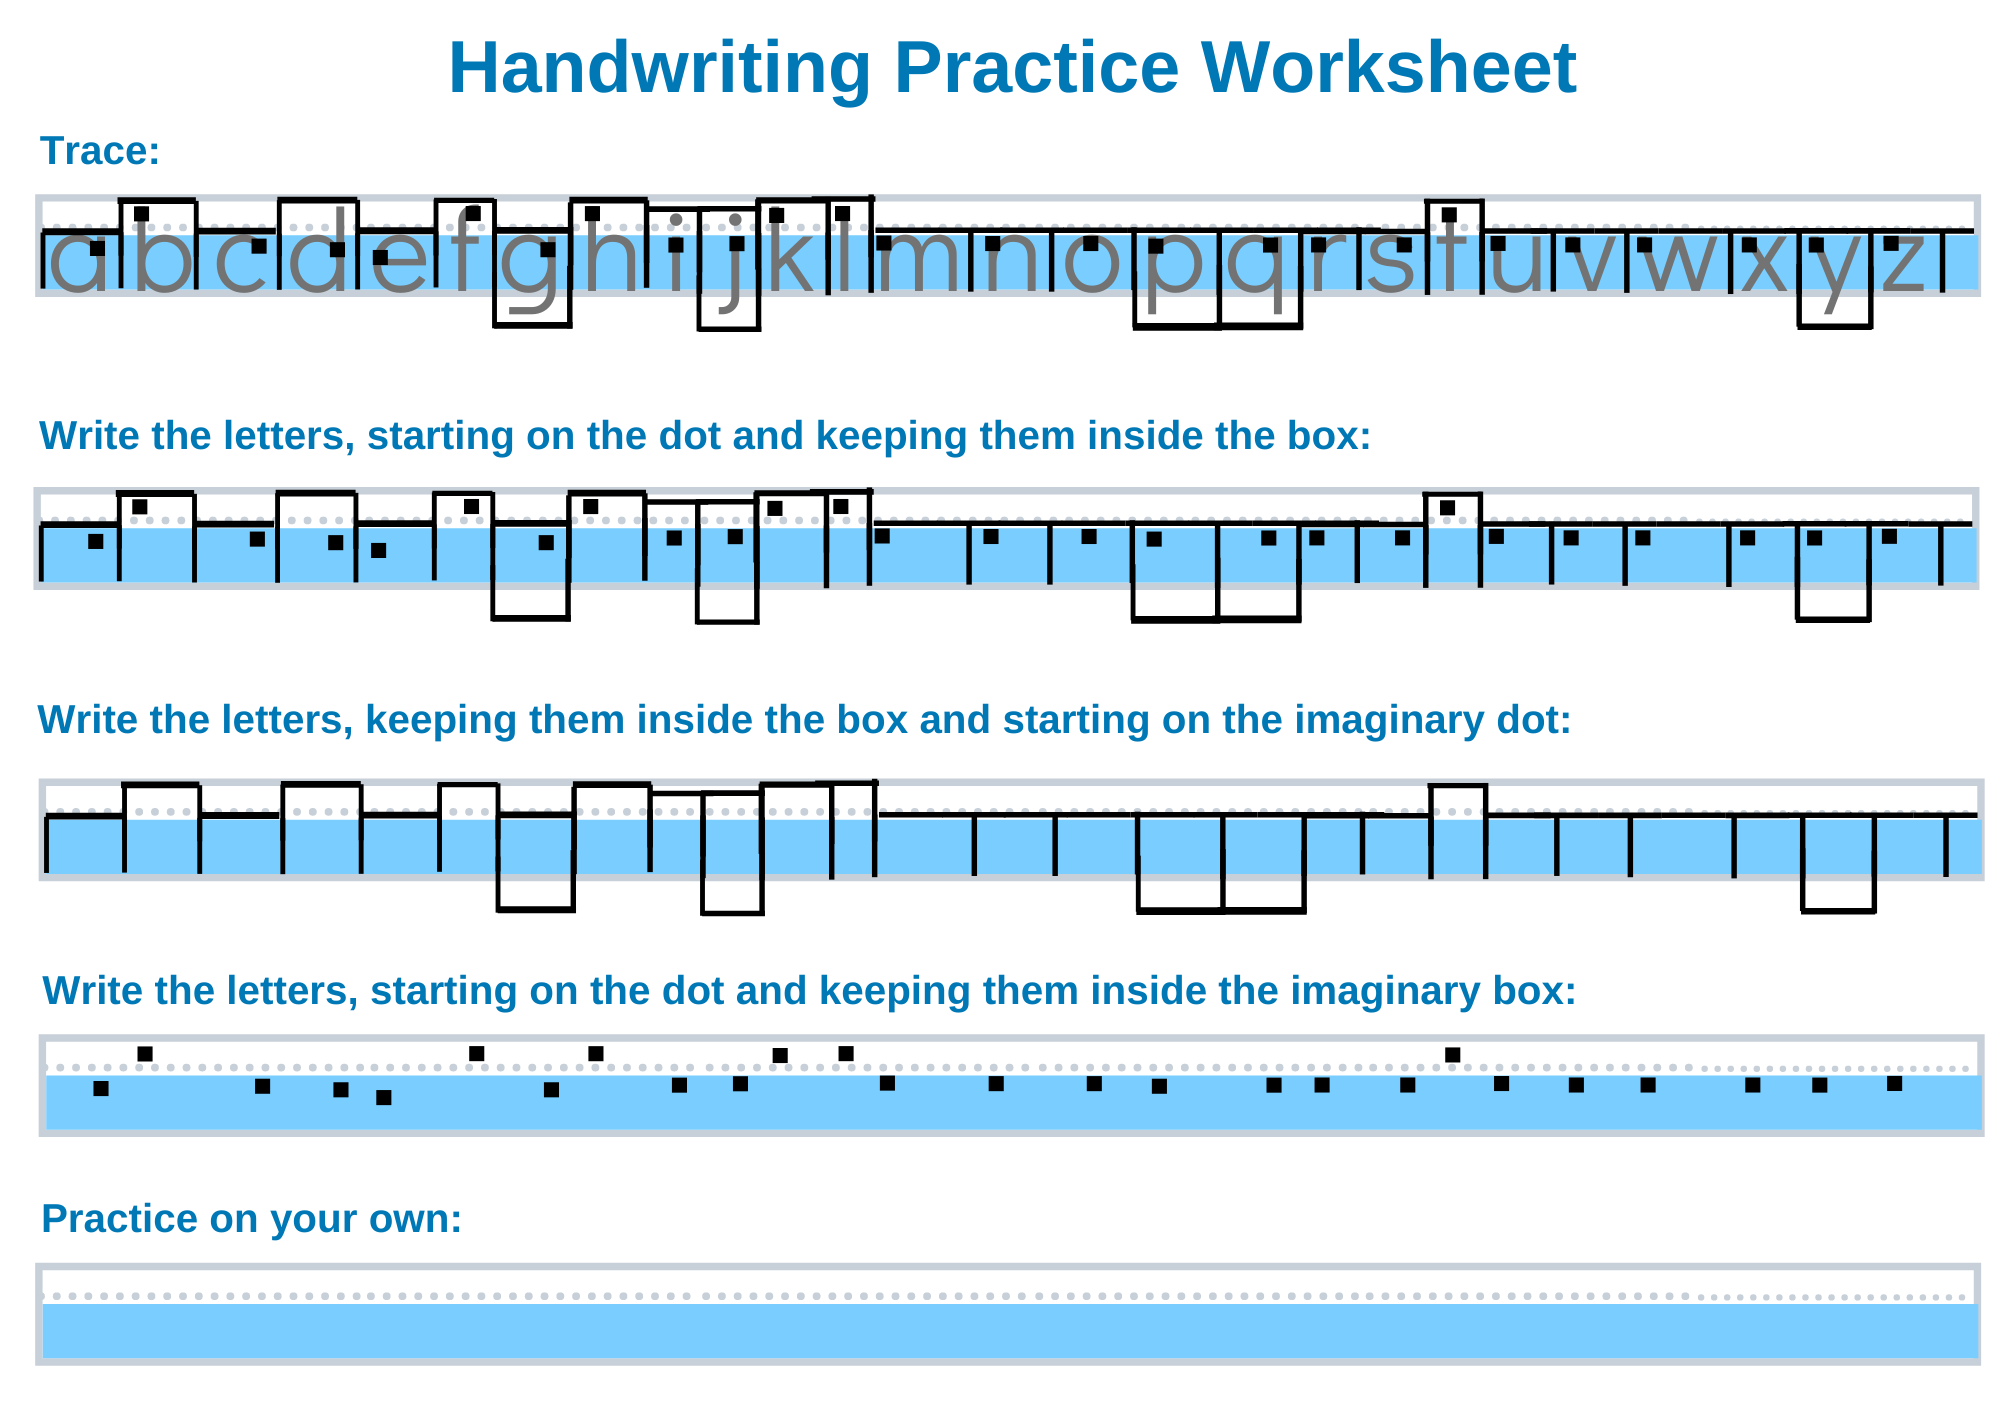 Tracing Letters On Worksheets For Handwriting Practice For Occupational 